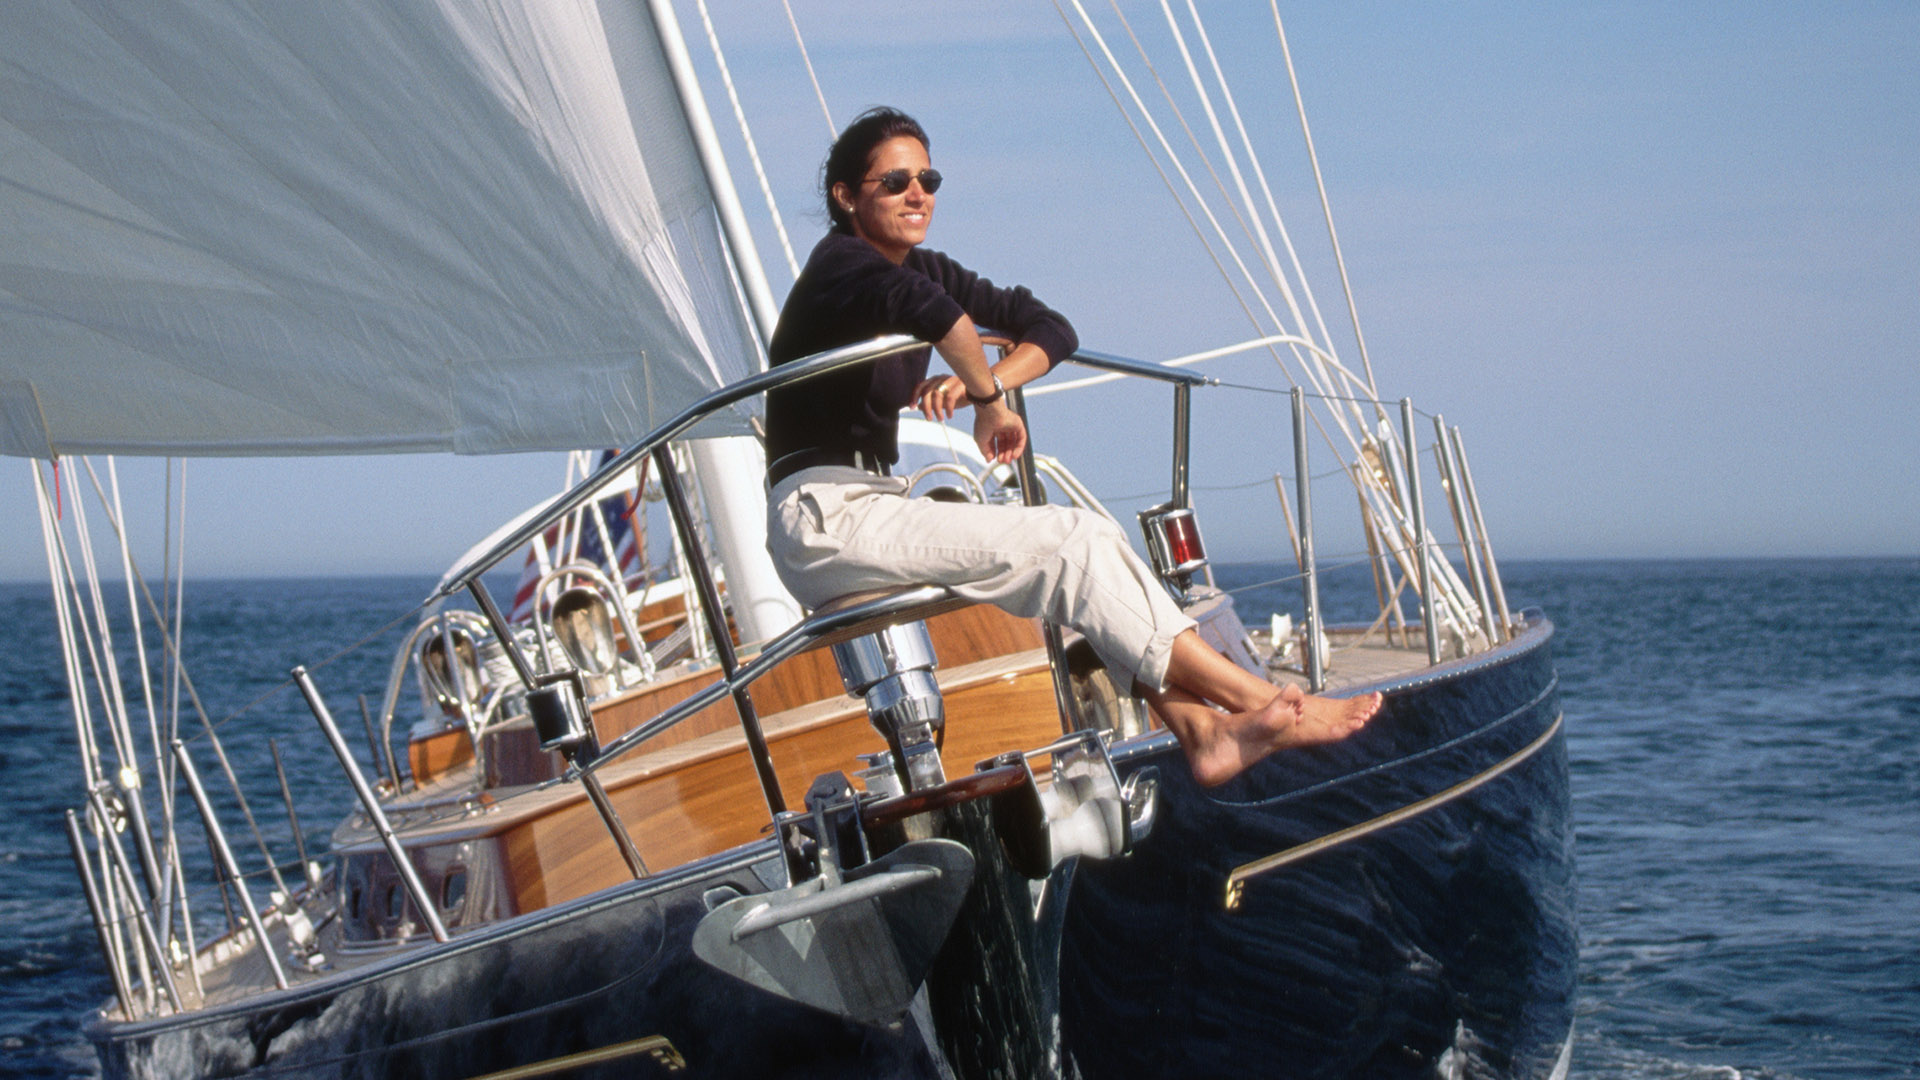 A woman rides on the bow of a sailboat as it cruises full sail